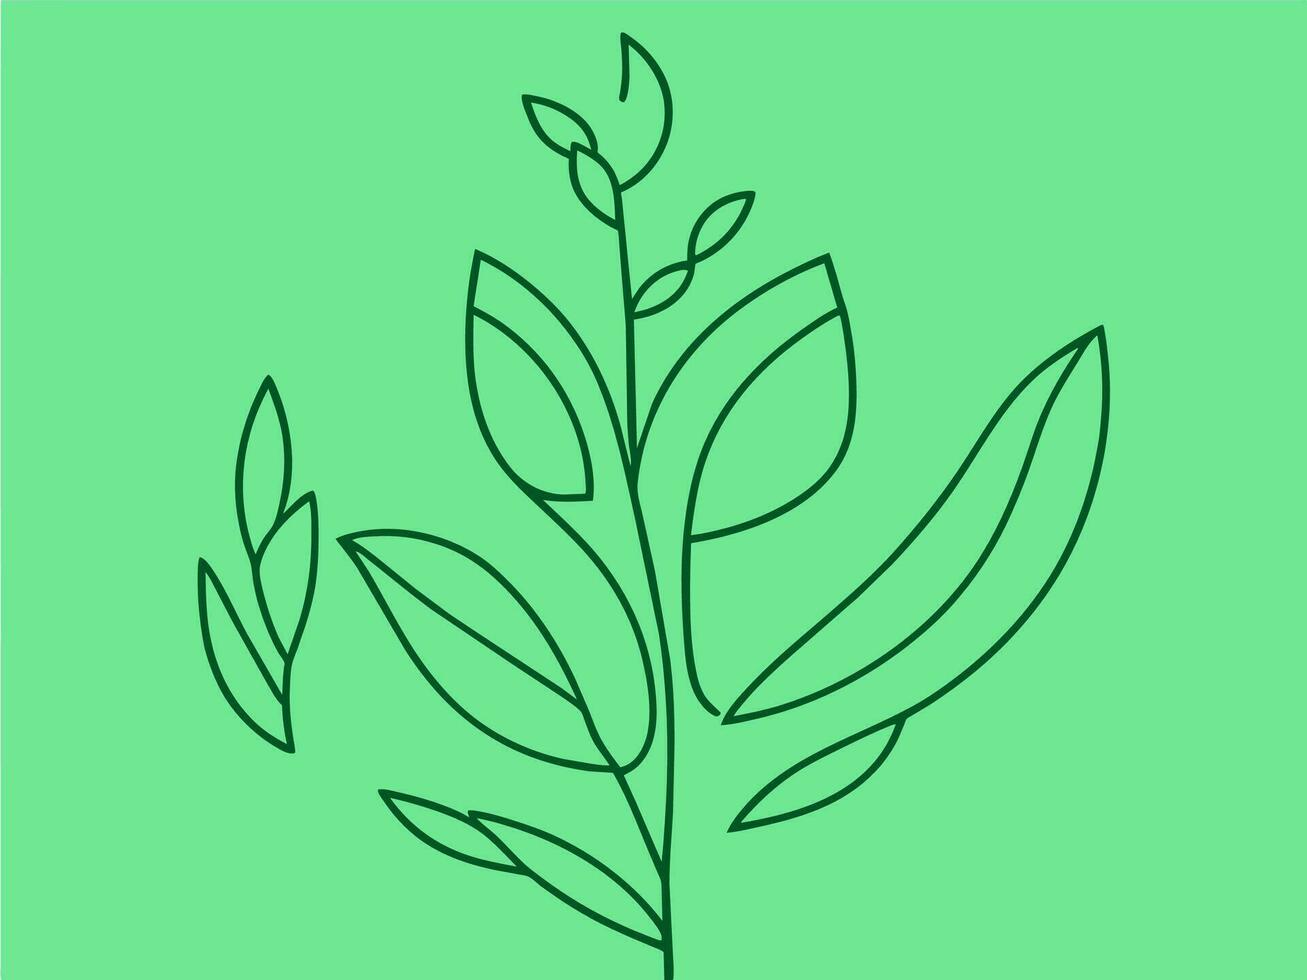 a line drawing of leaves on a green background vector